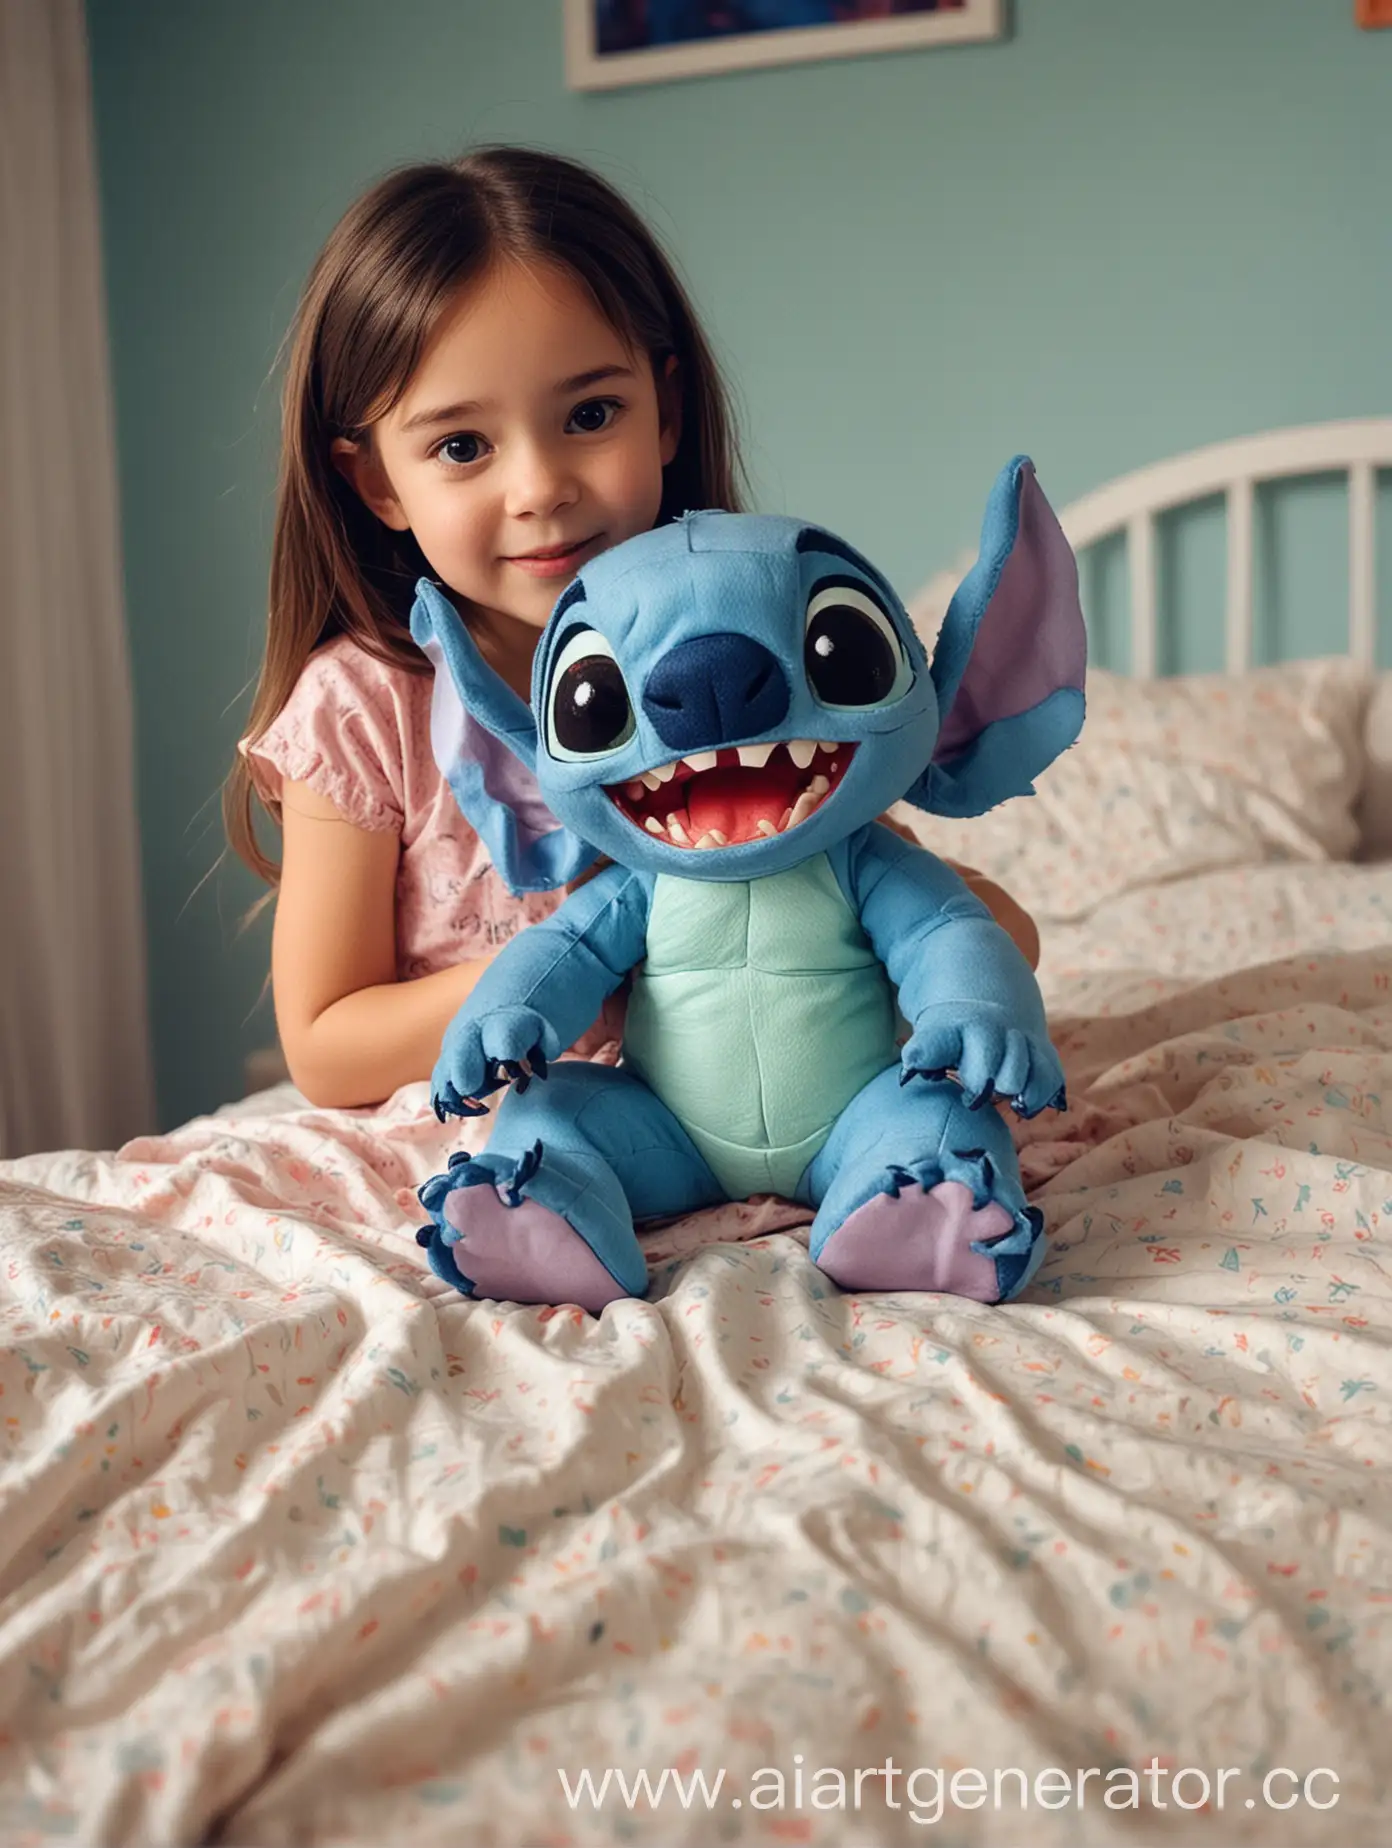 Young-Girl-Playing-with-Stitch-Toy-in-Her-Bedroom